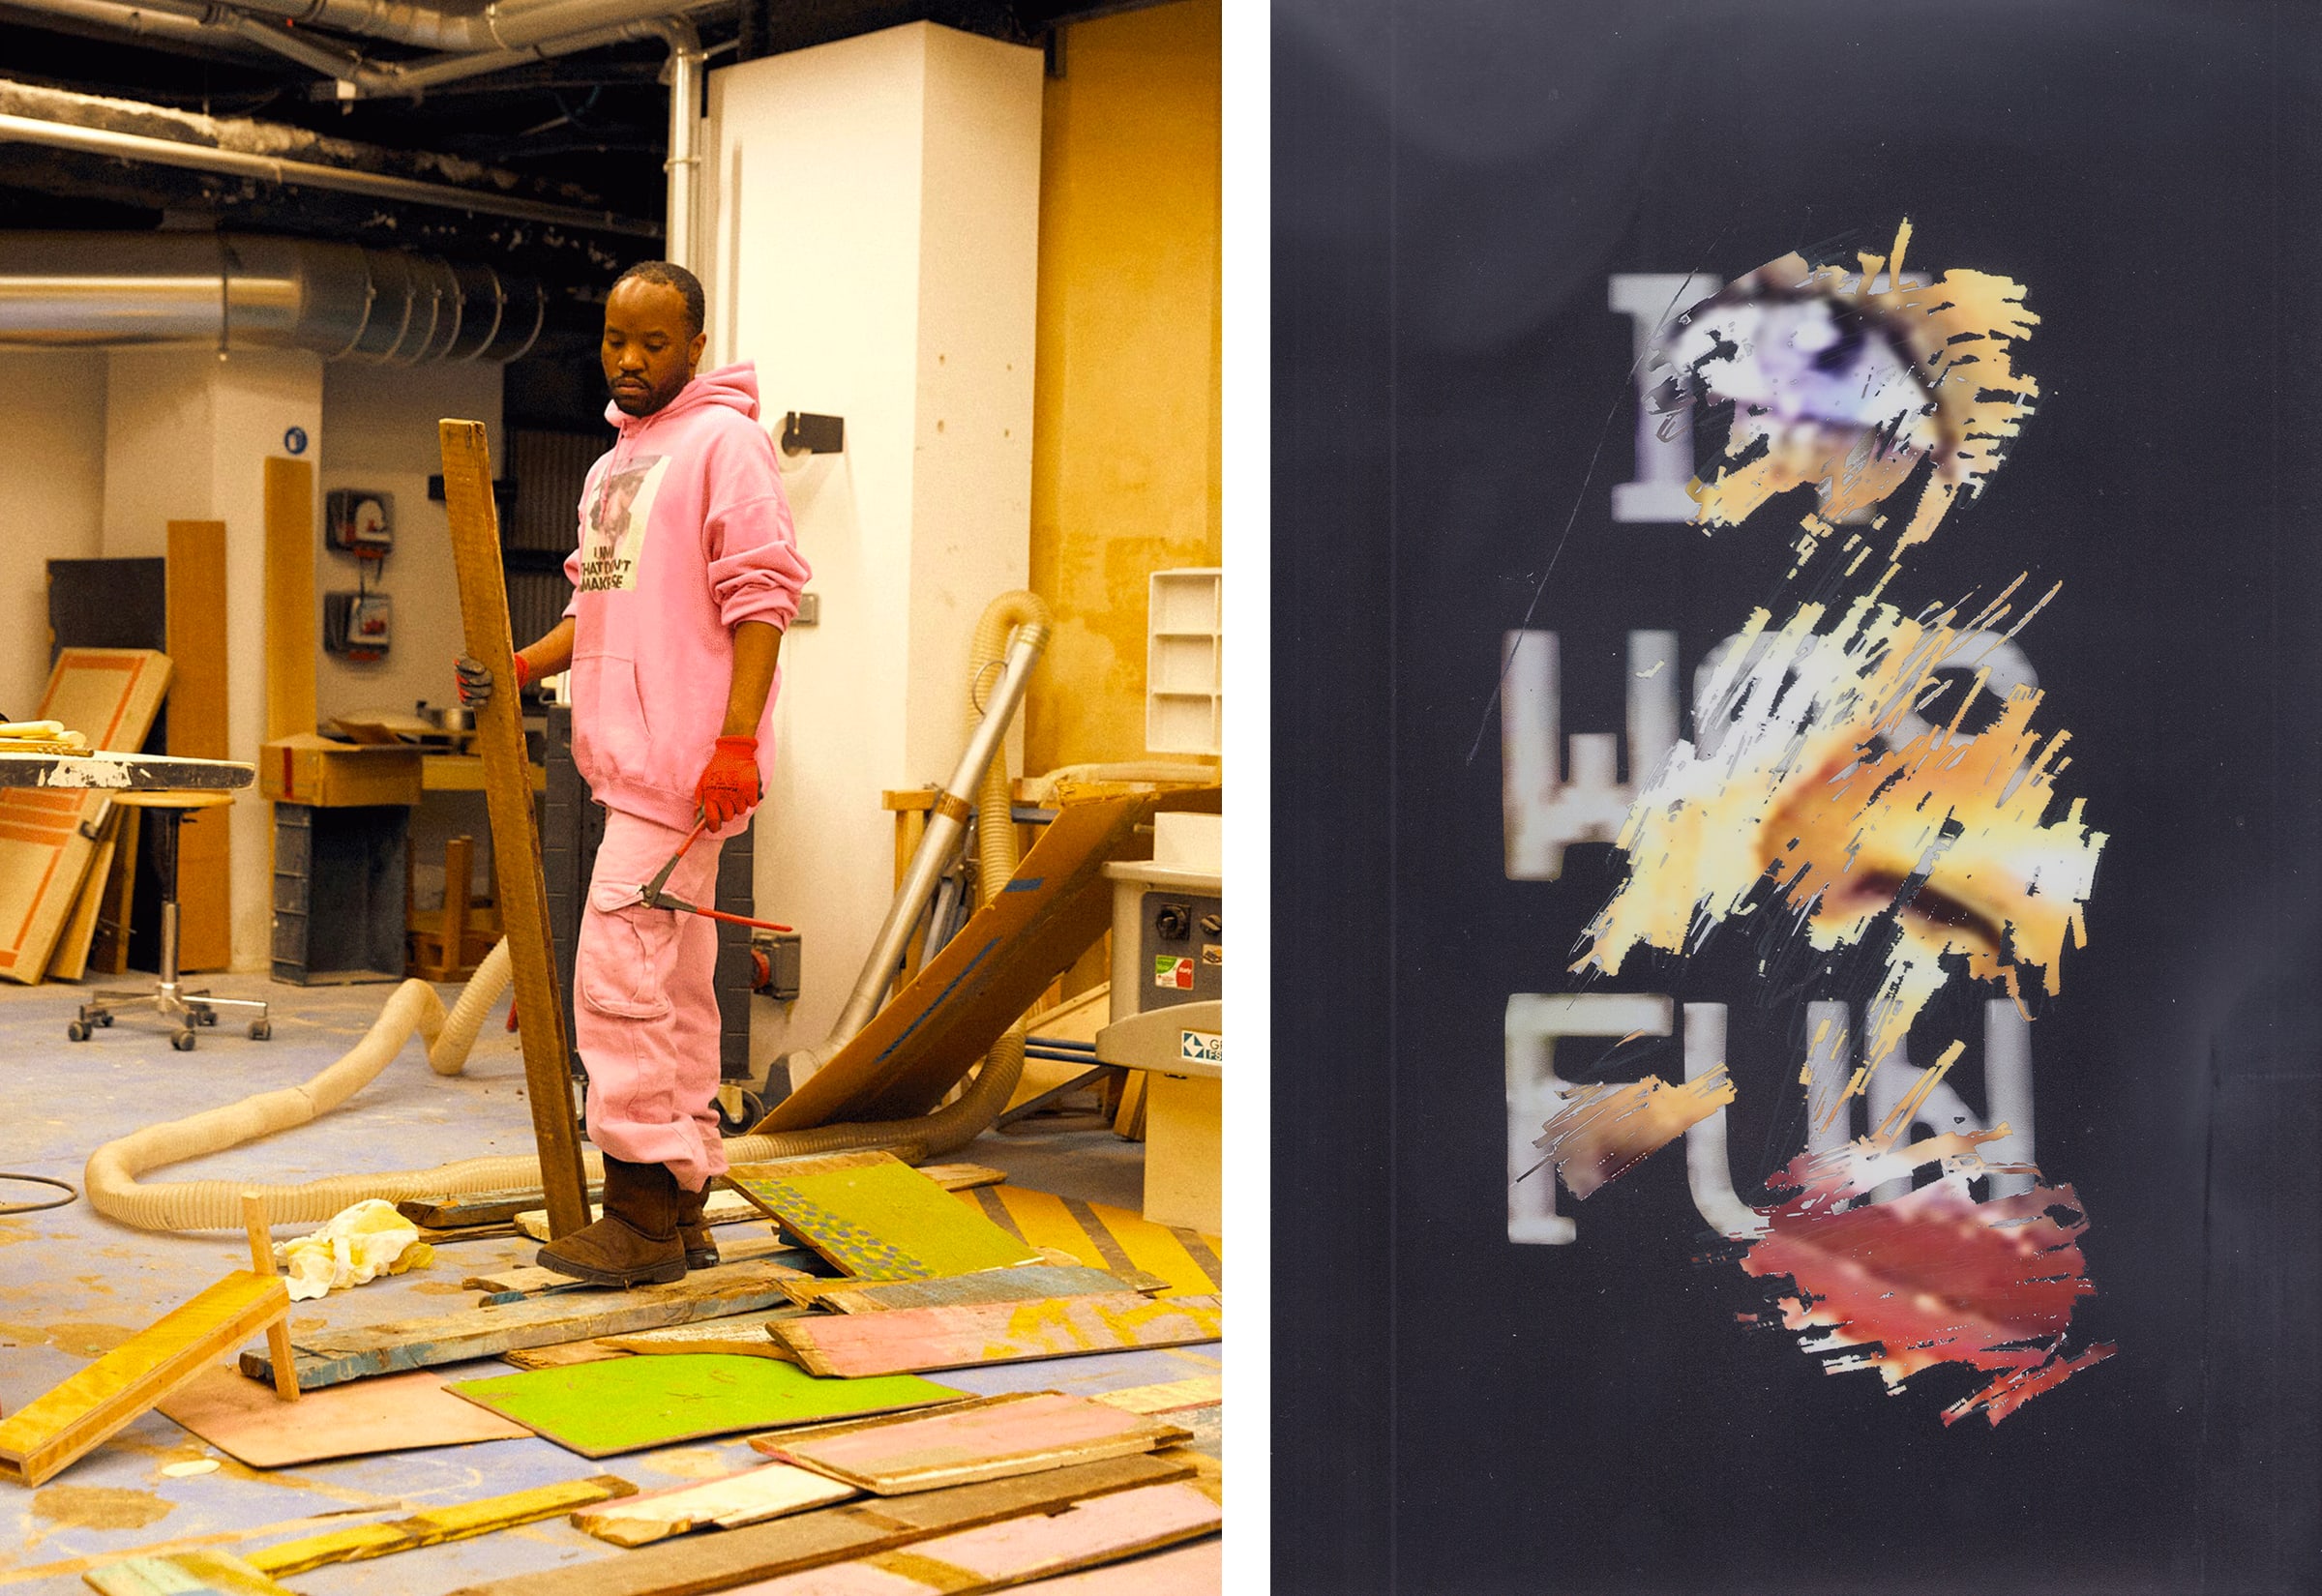 Left: Akeem Smith in his studio in Paris. Photograph by Mathieu Richer Mamousse for Art Basel. Right: Akeem Smith, One last cry, 2023 © Akeem Smith.